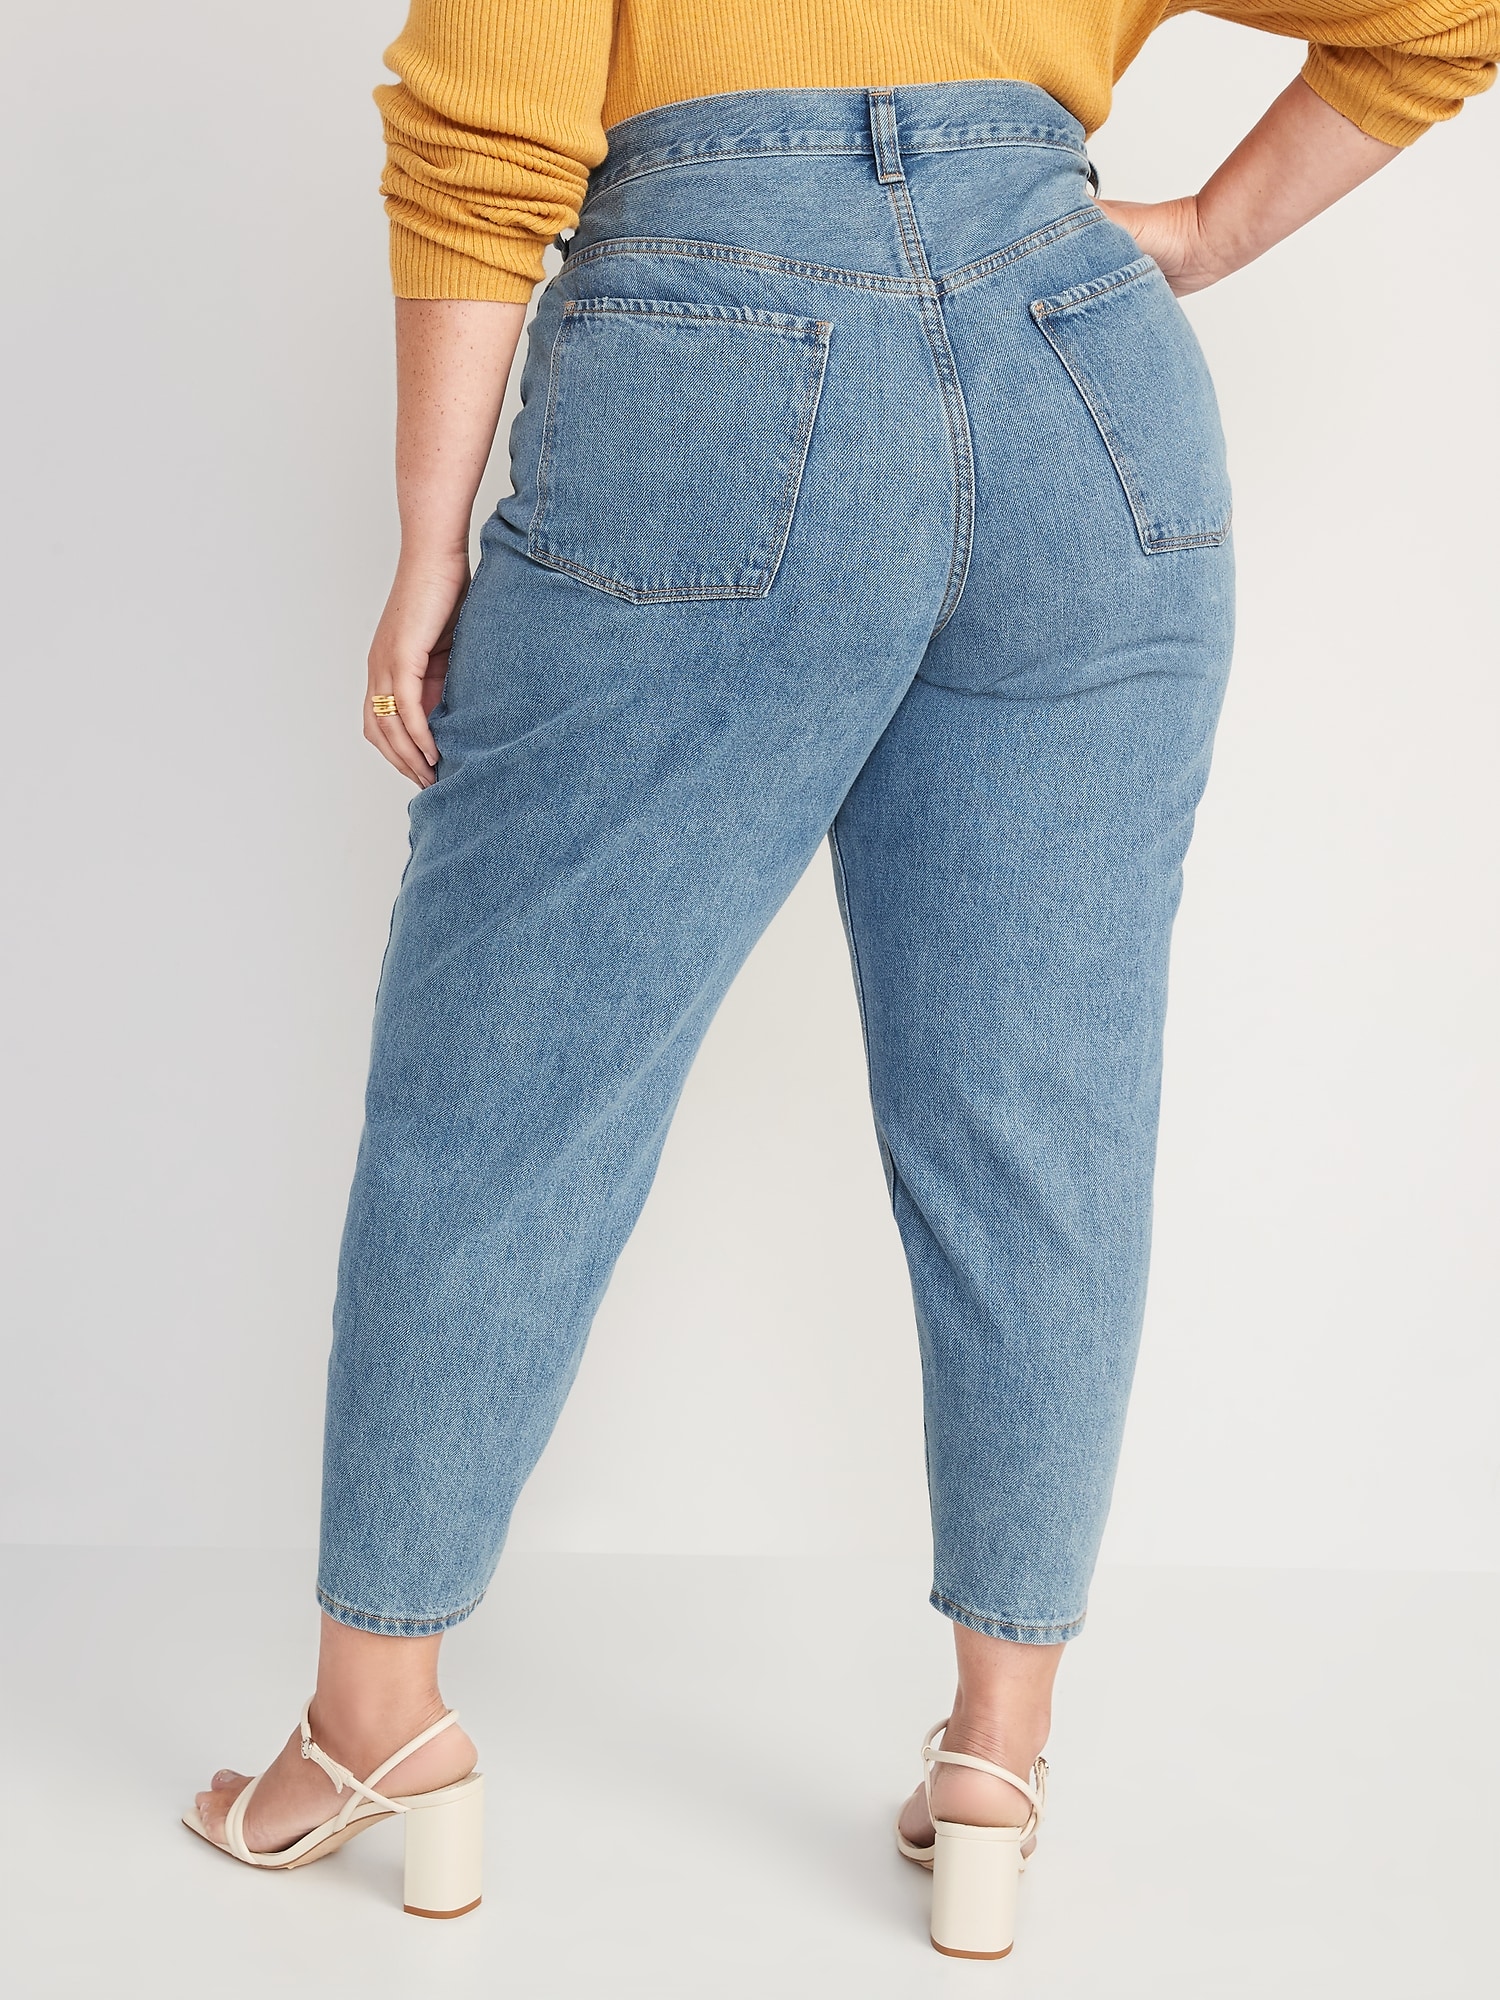 Extra High-Waisted Ripped Non-Stretch Balloon Jeans for Women | Old Navy